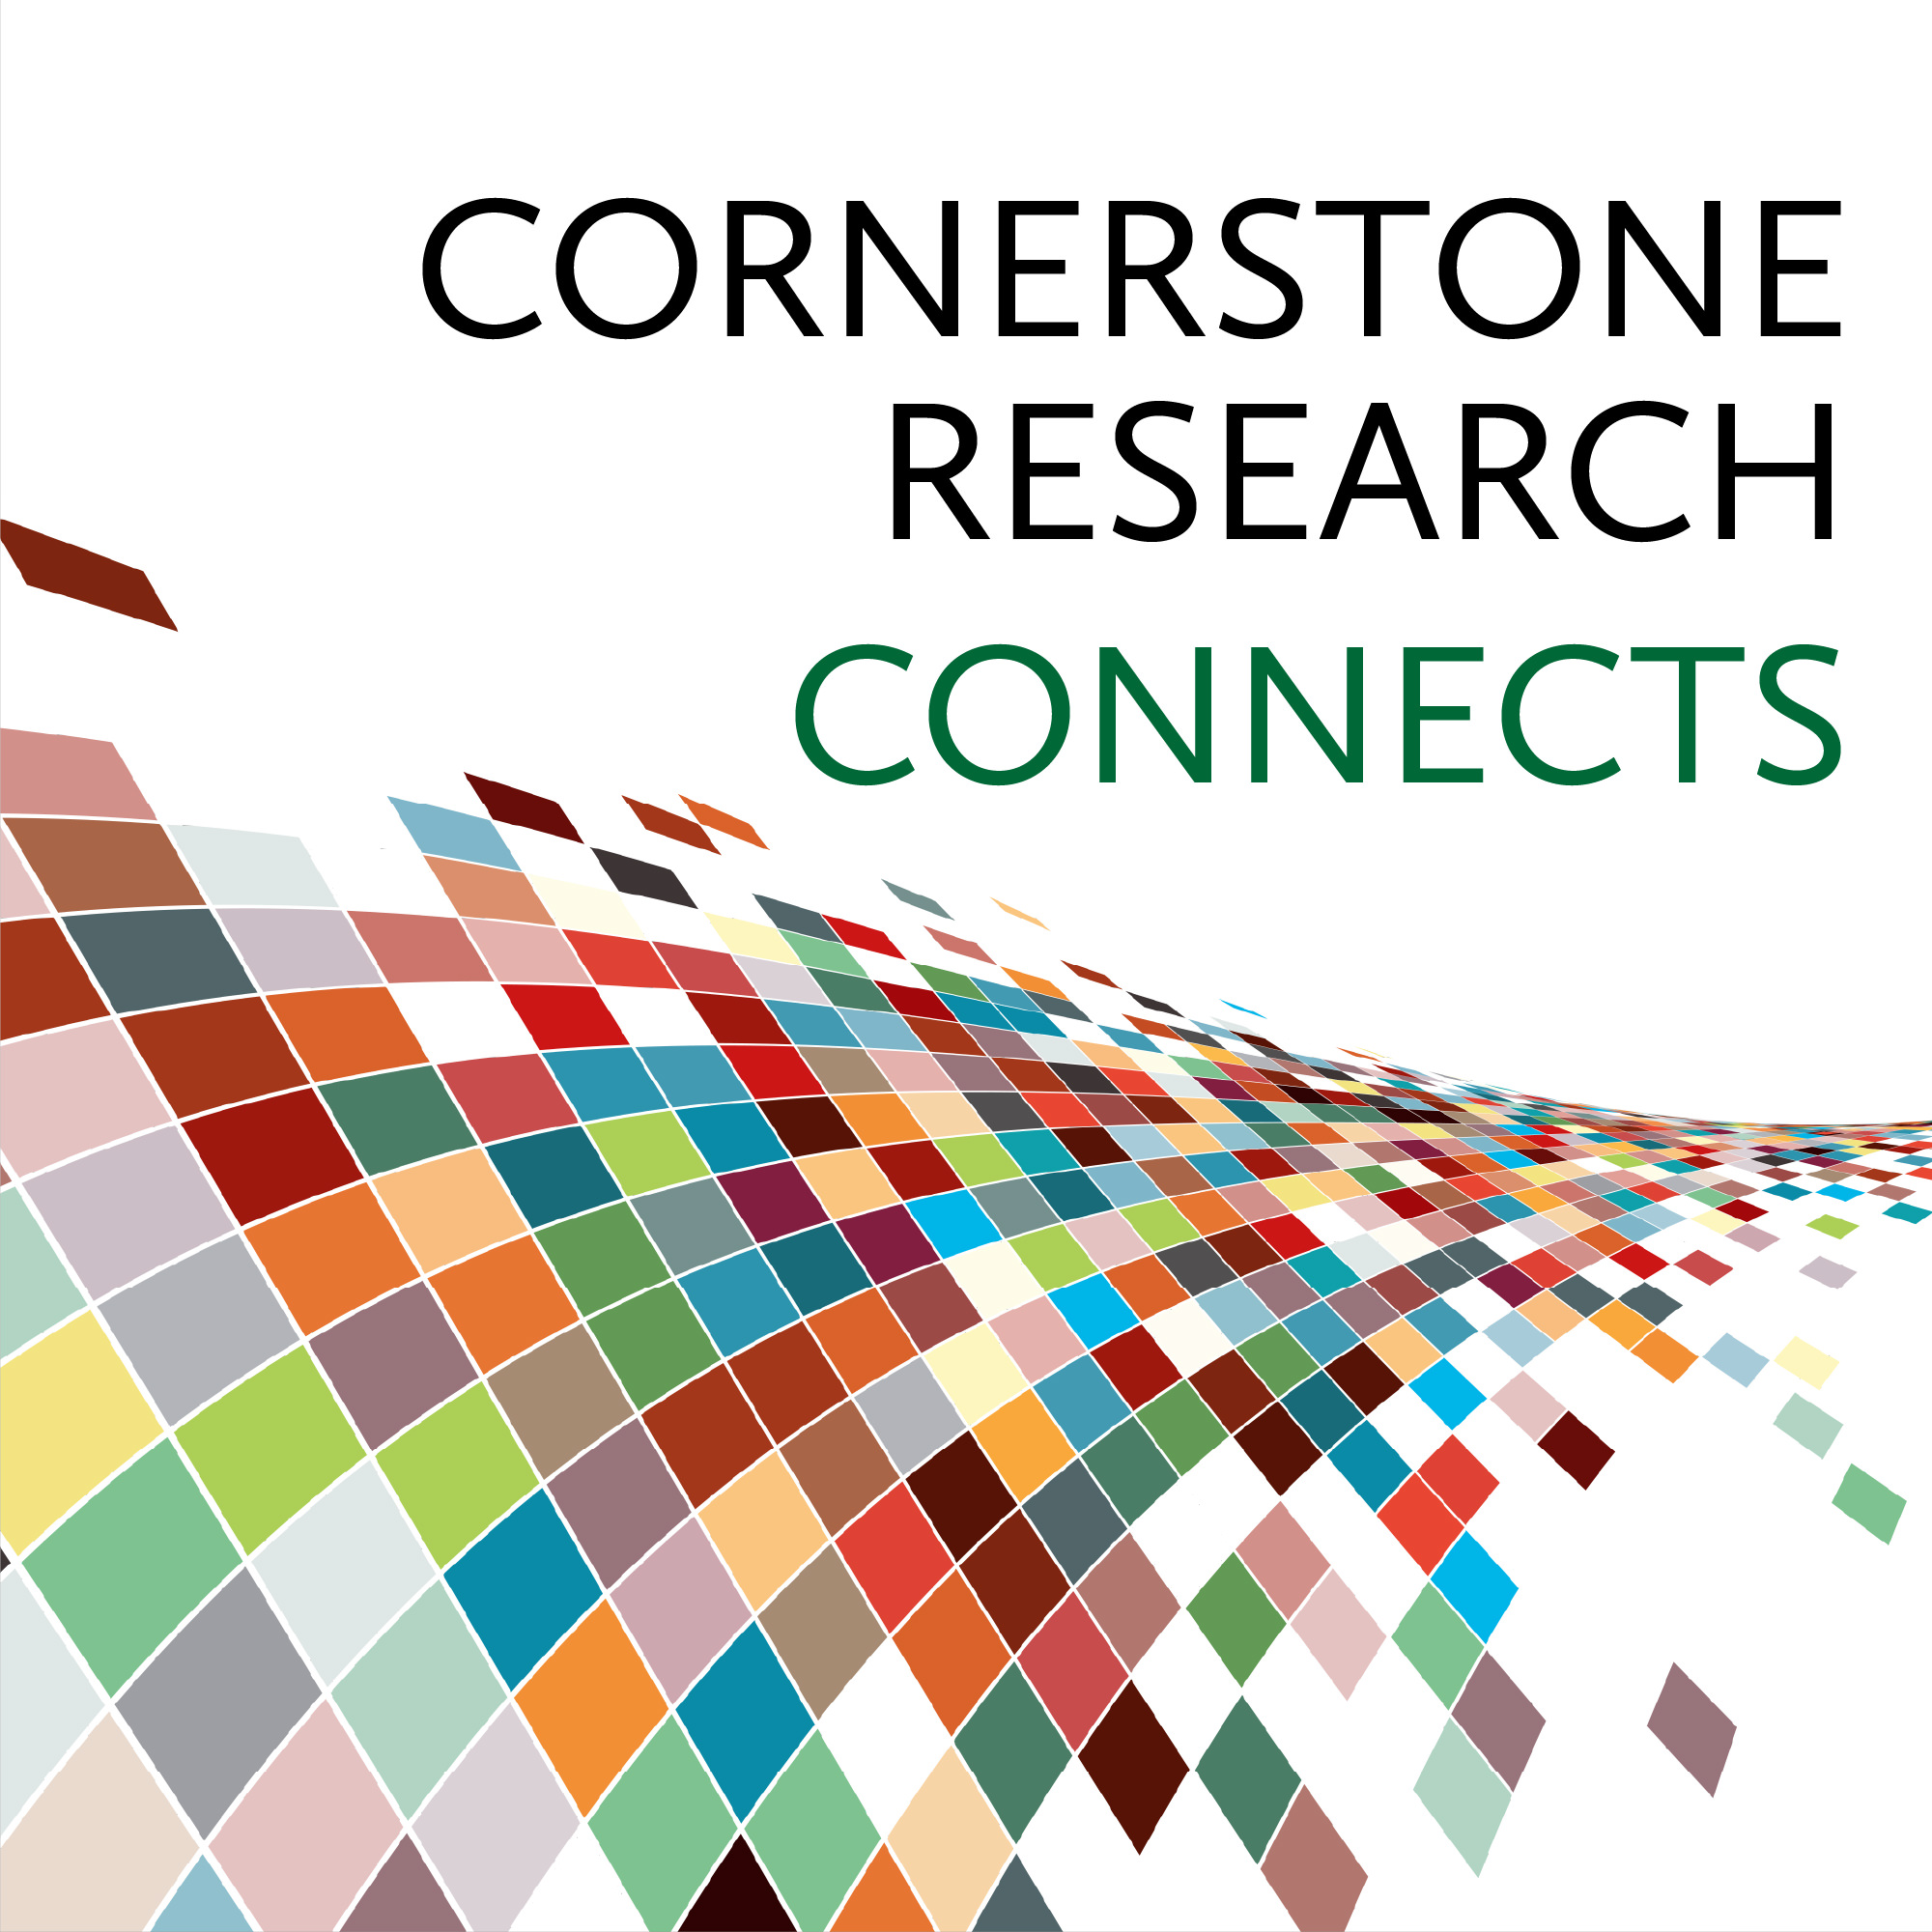 Cornerstone Research Connects